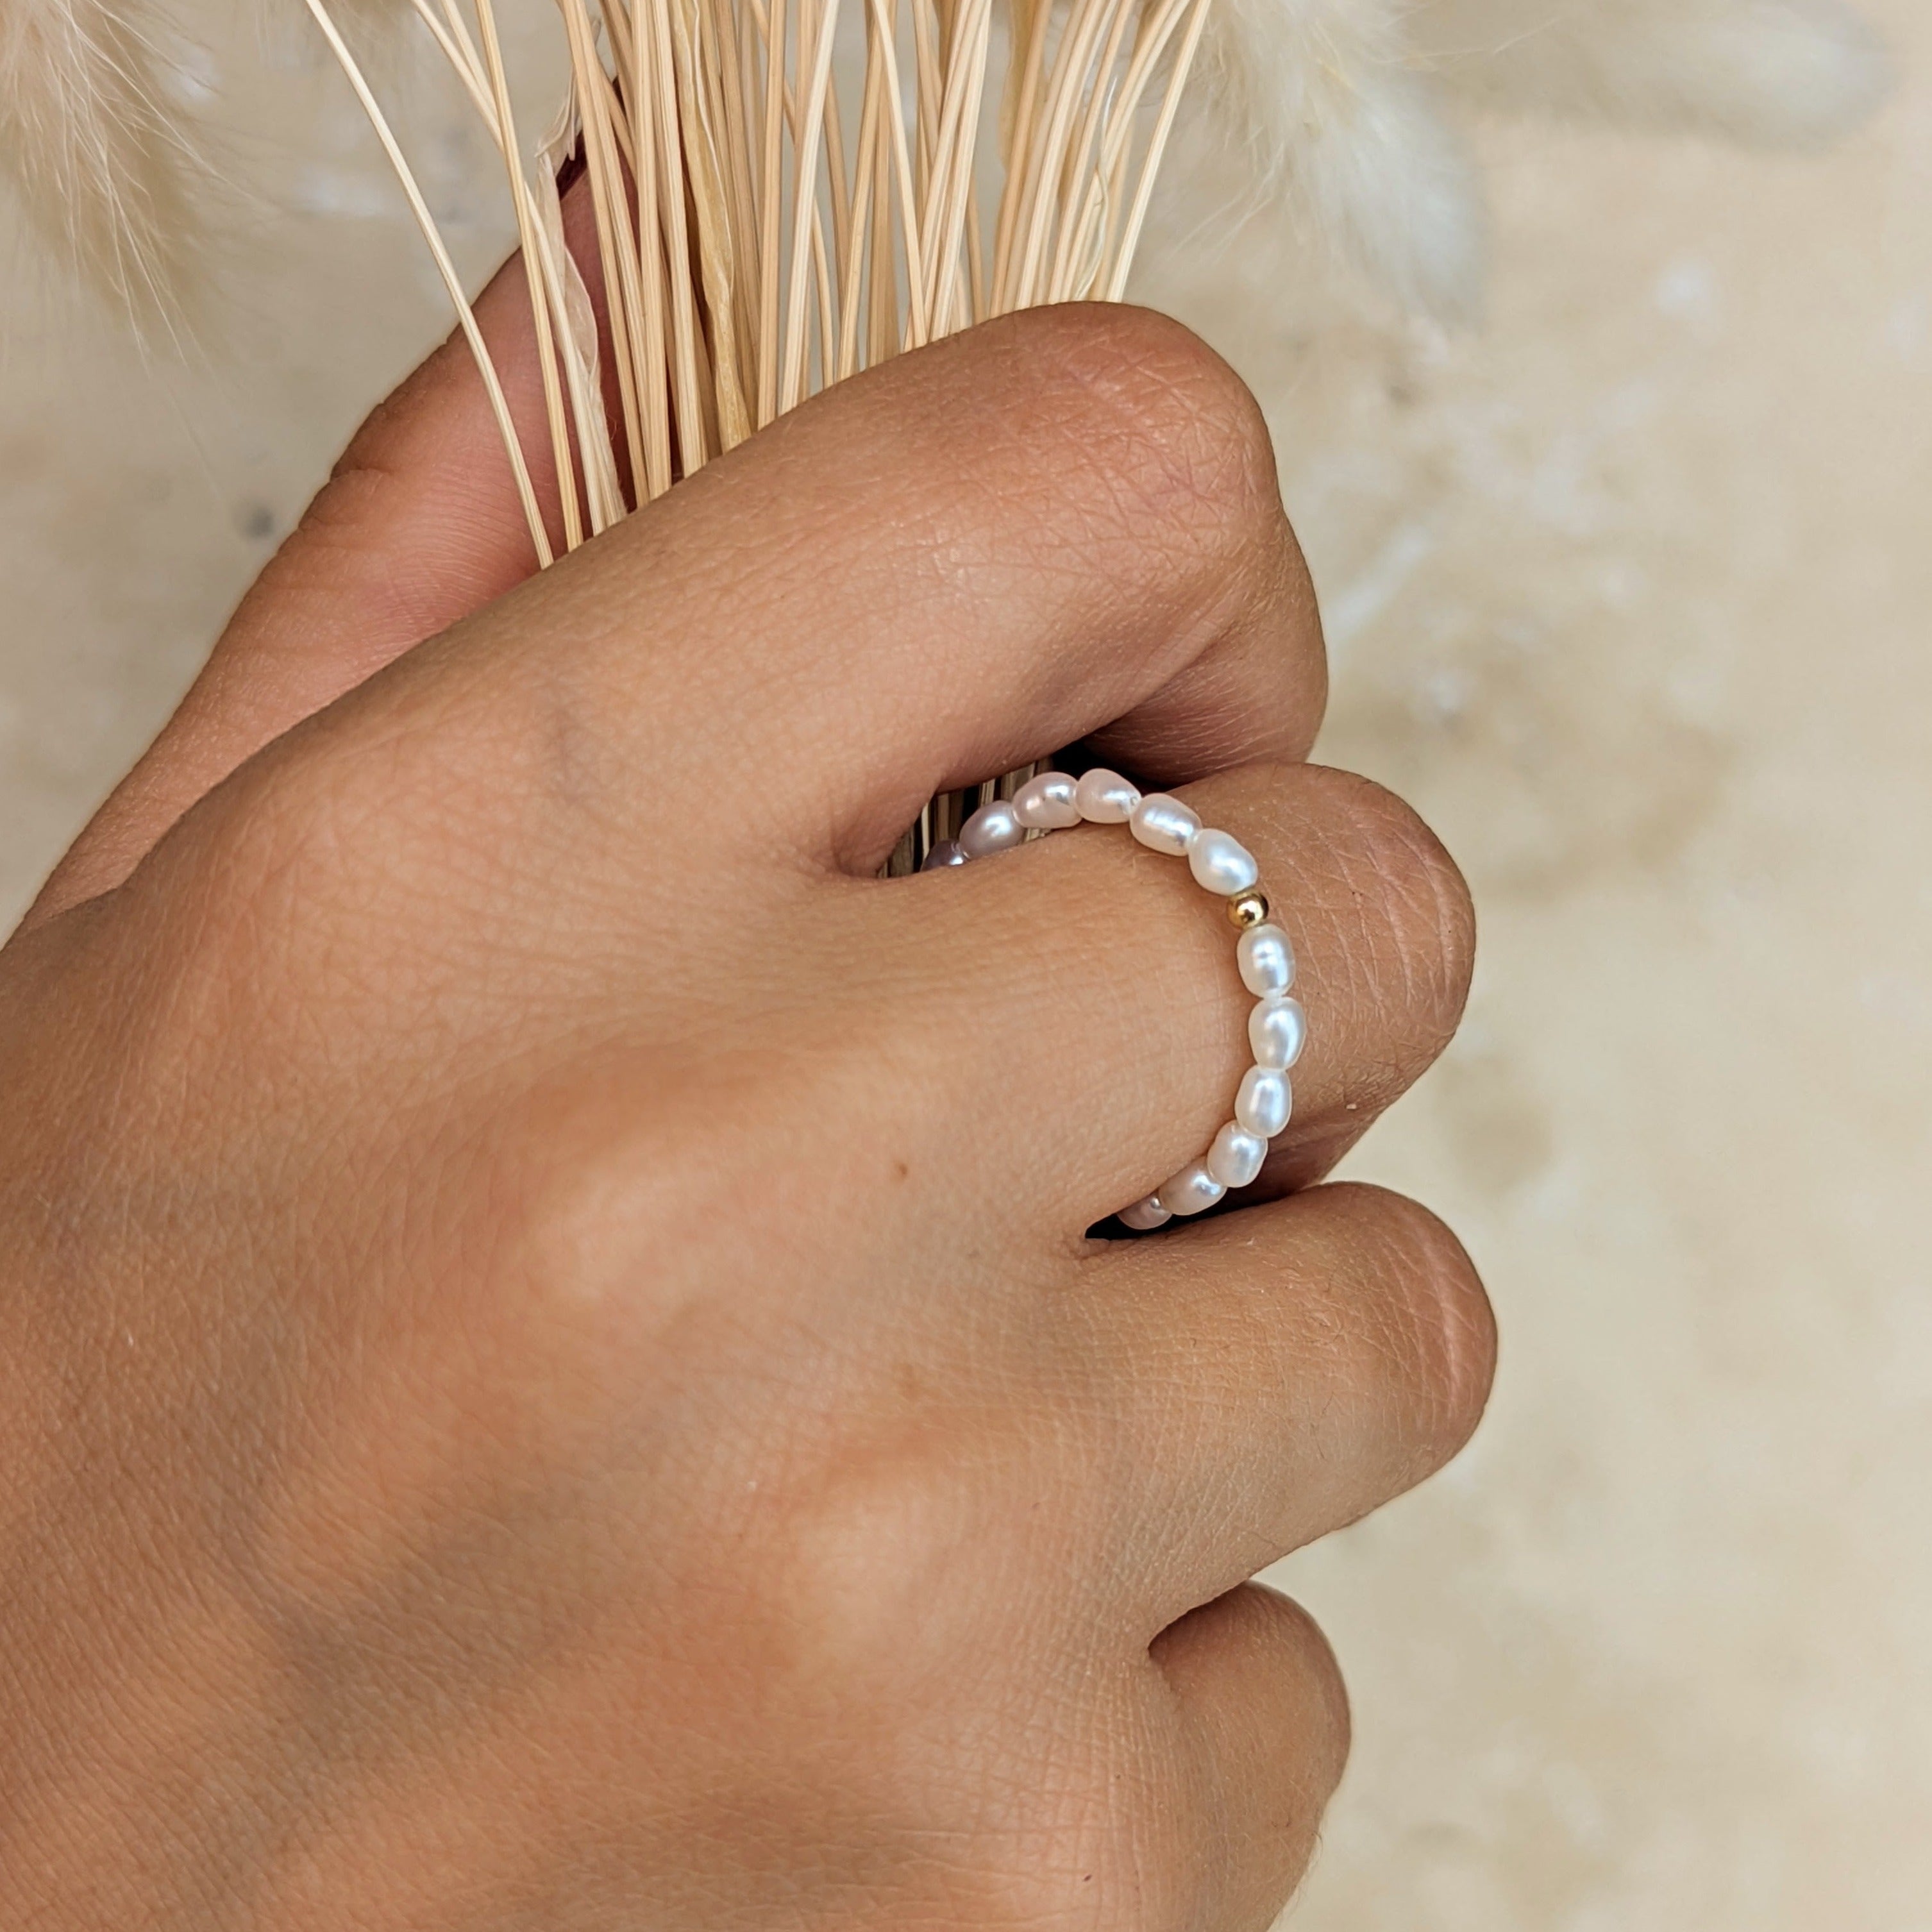 Hand holding dried grass wearing a pearl ring with small gold bead